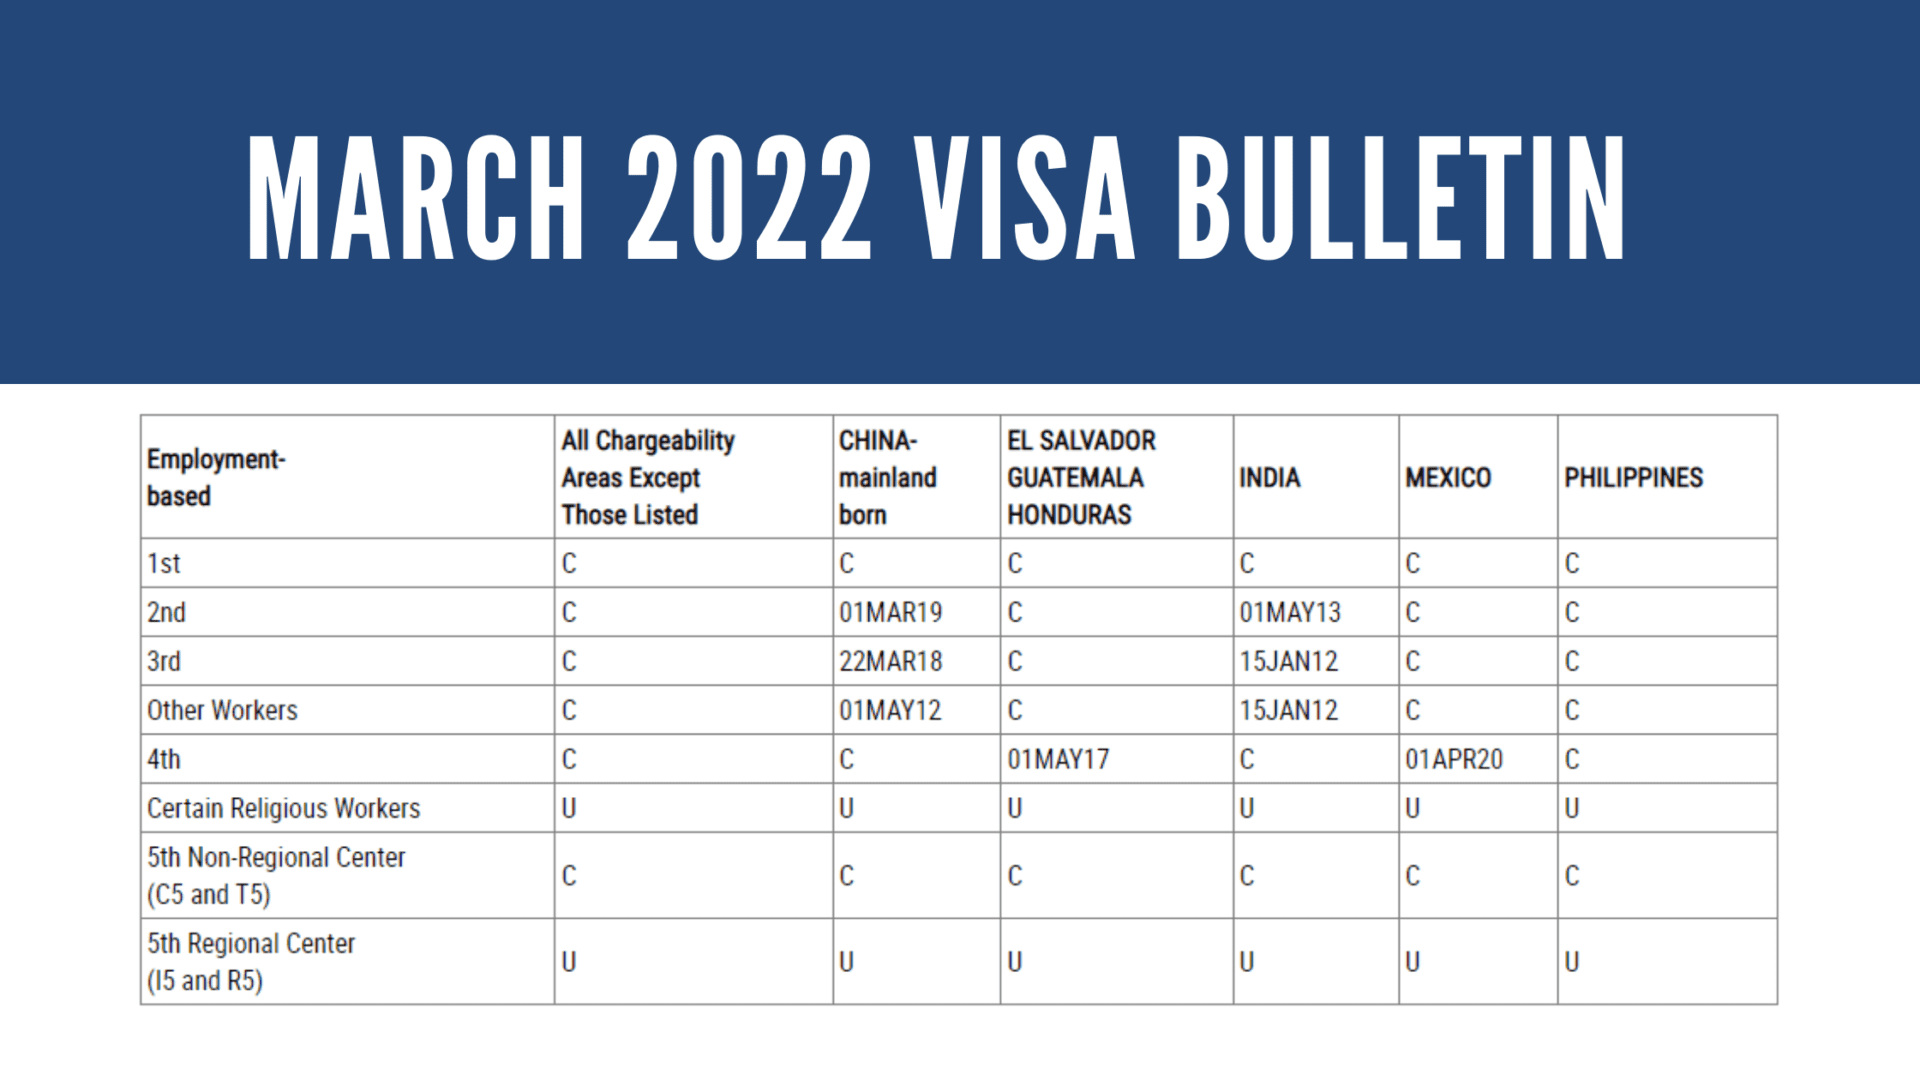 MARCH 2022 VISA BULLETIN: UNCHANGED FOR EB-5 WITH ADDITIONAL OUTLOOK FOR APRIL